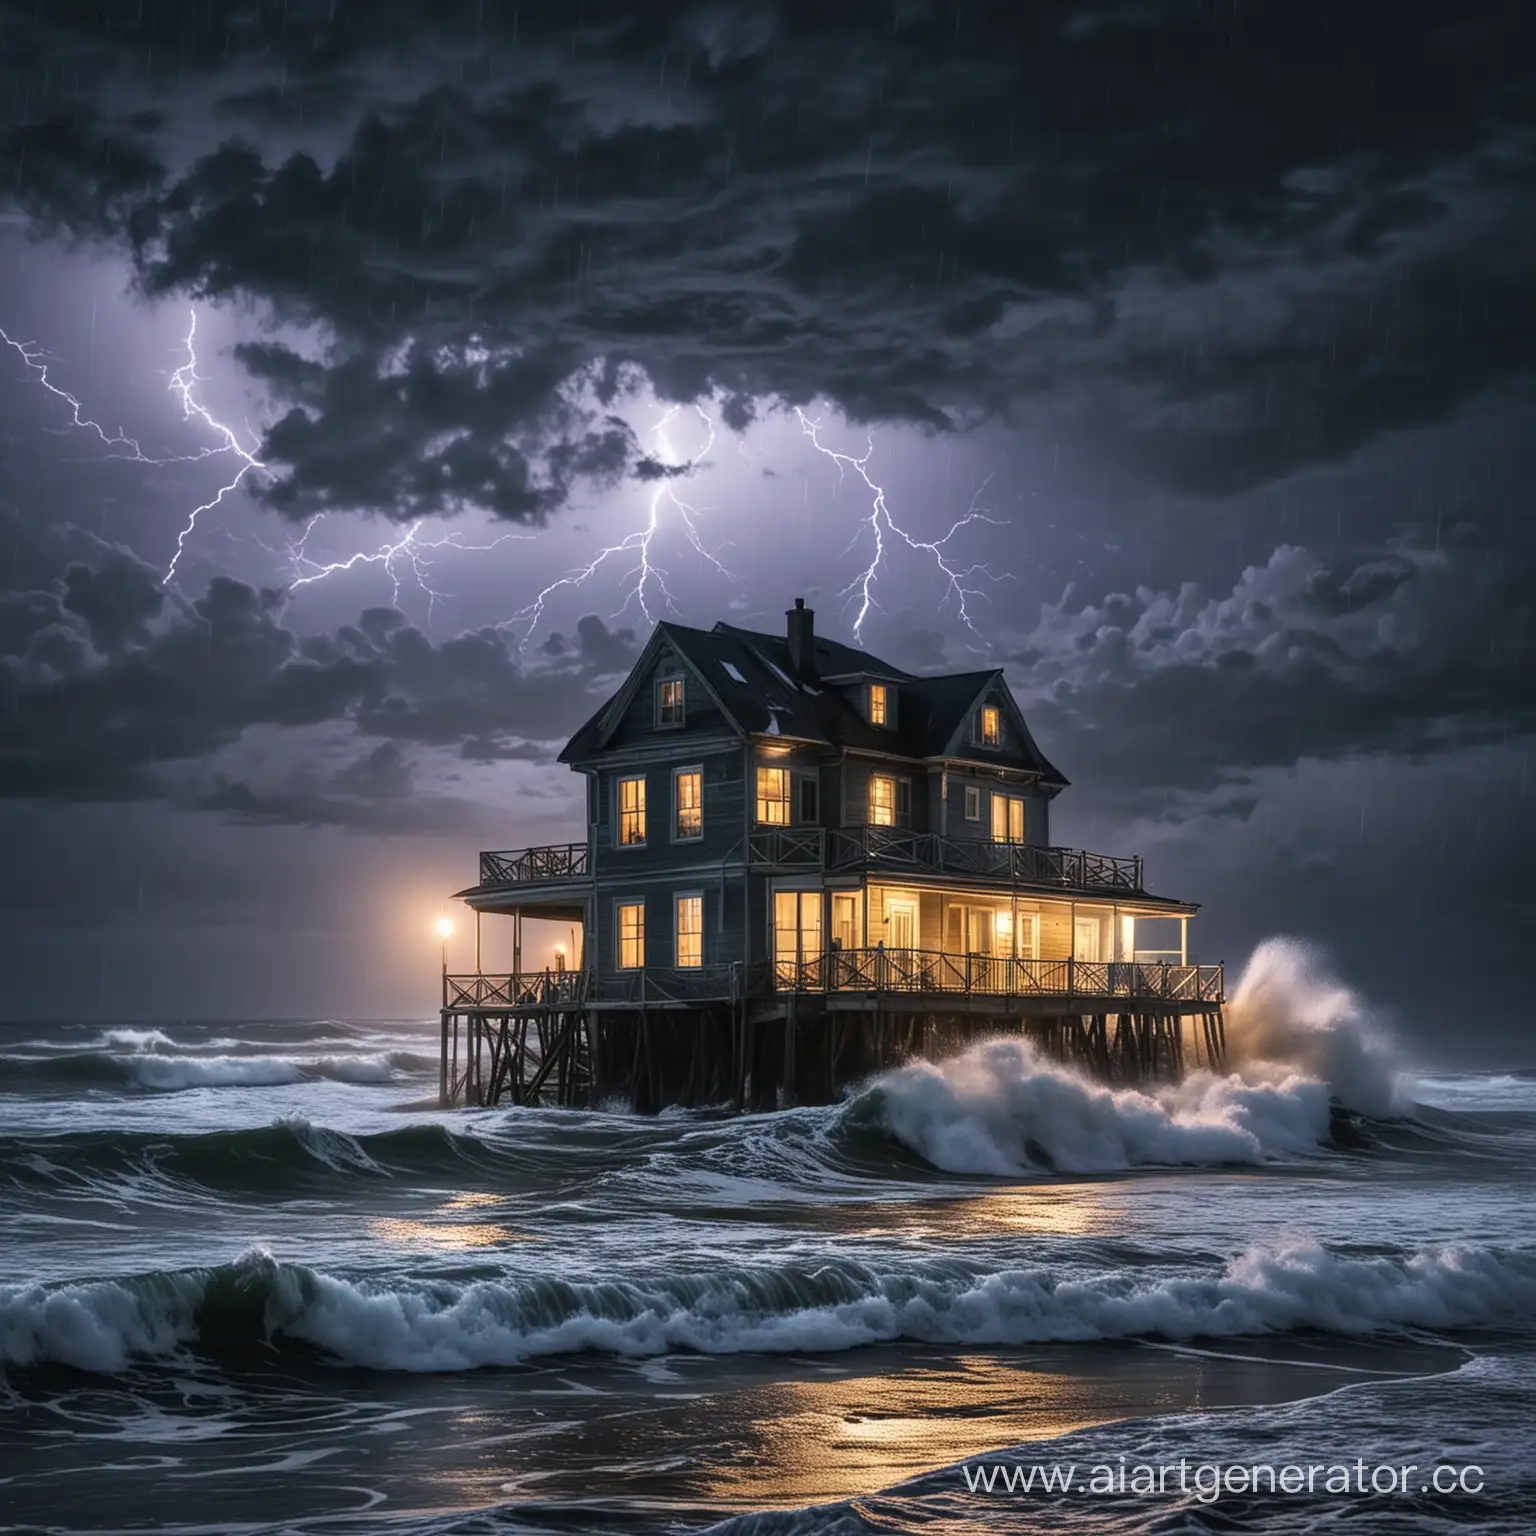 Oceanfront-House-Battling-Stormy-Seas-at-Night